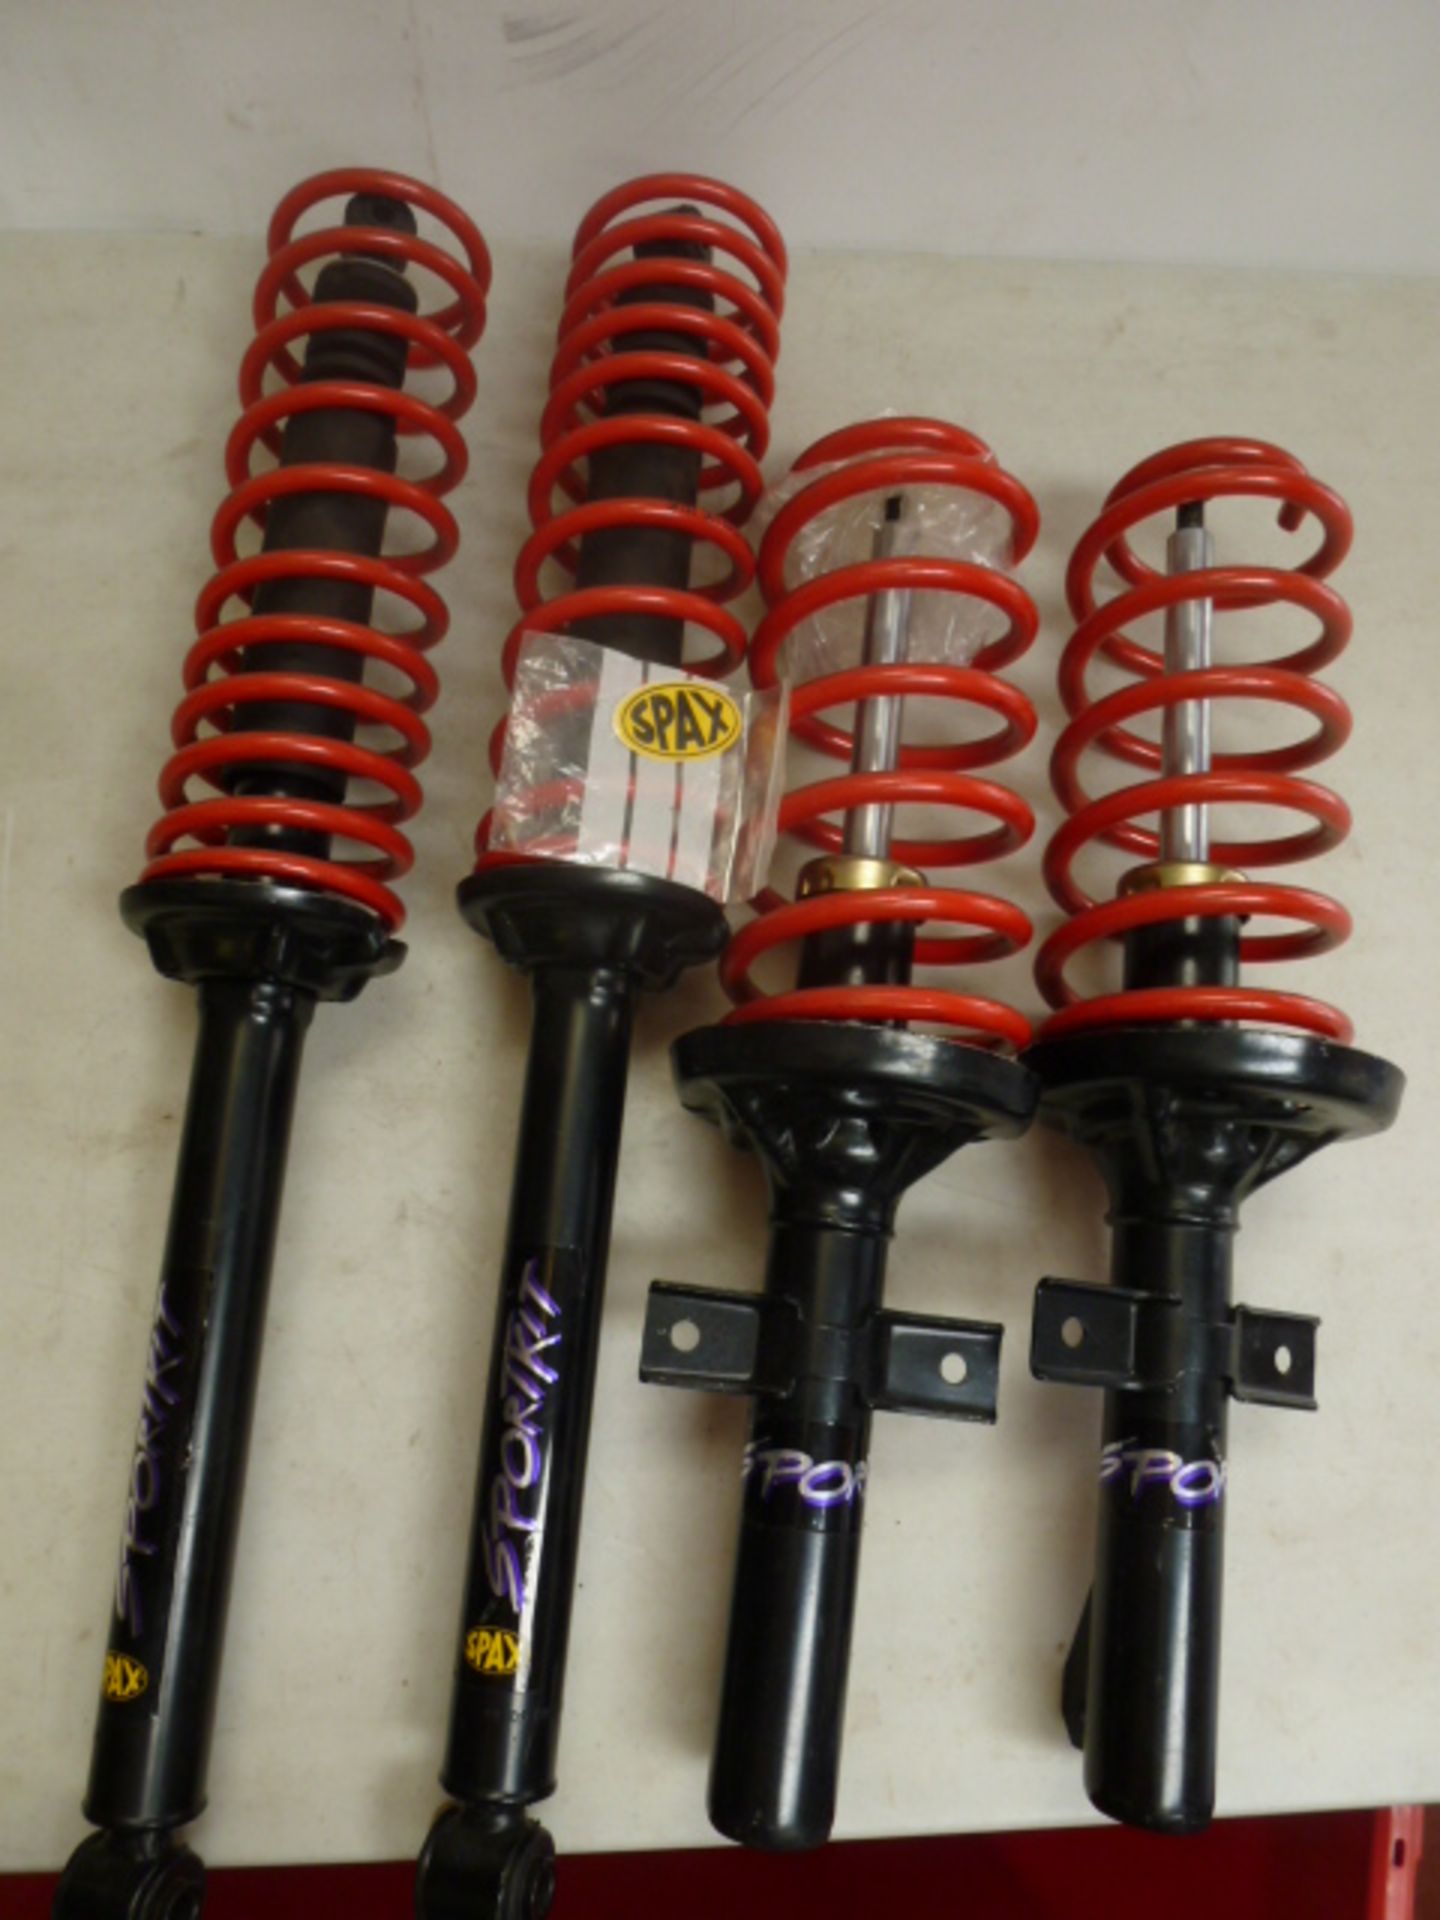 Spax Absolute Performance Suspension Kit V7762. Compatible with Ford Escort Hatchback 1990-1992. - Image 2 of 3